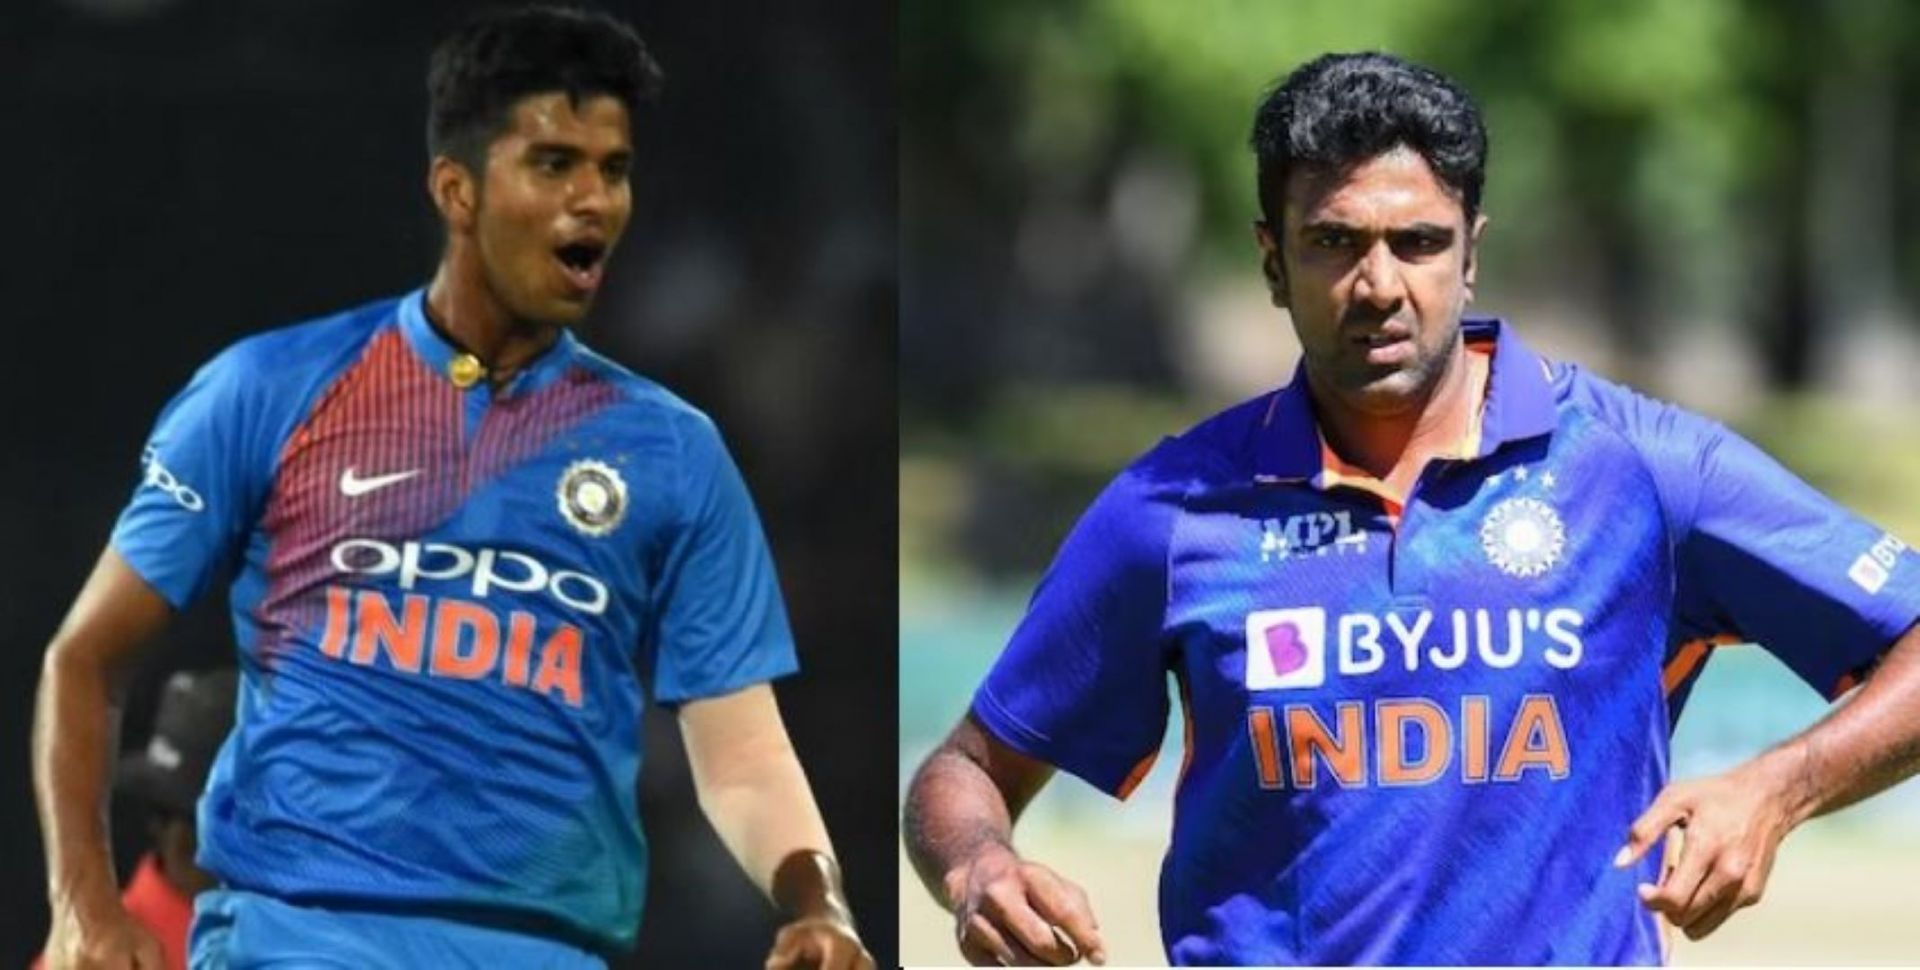 It could come down to a battle between the two Tamil Nadu spinners for one spot